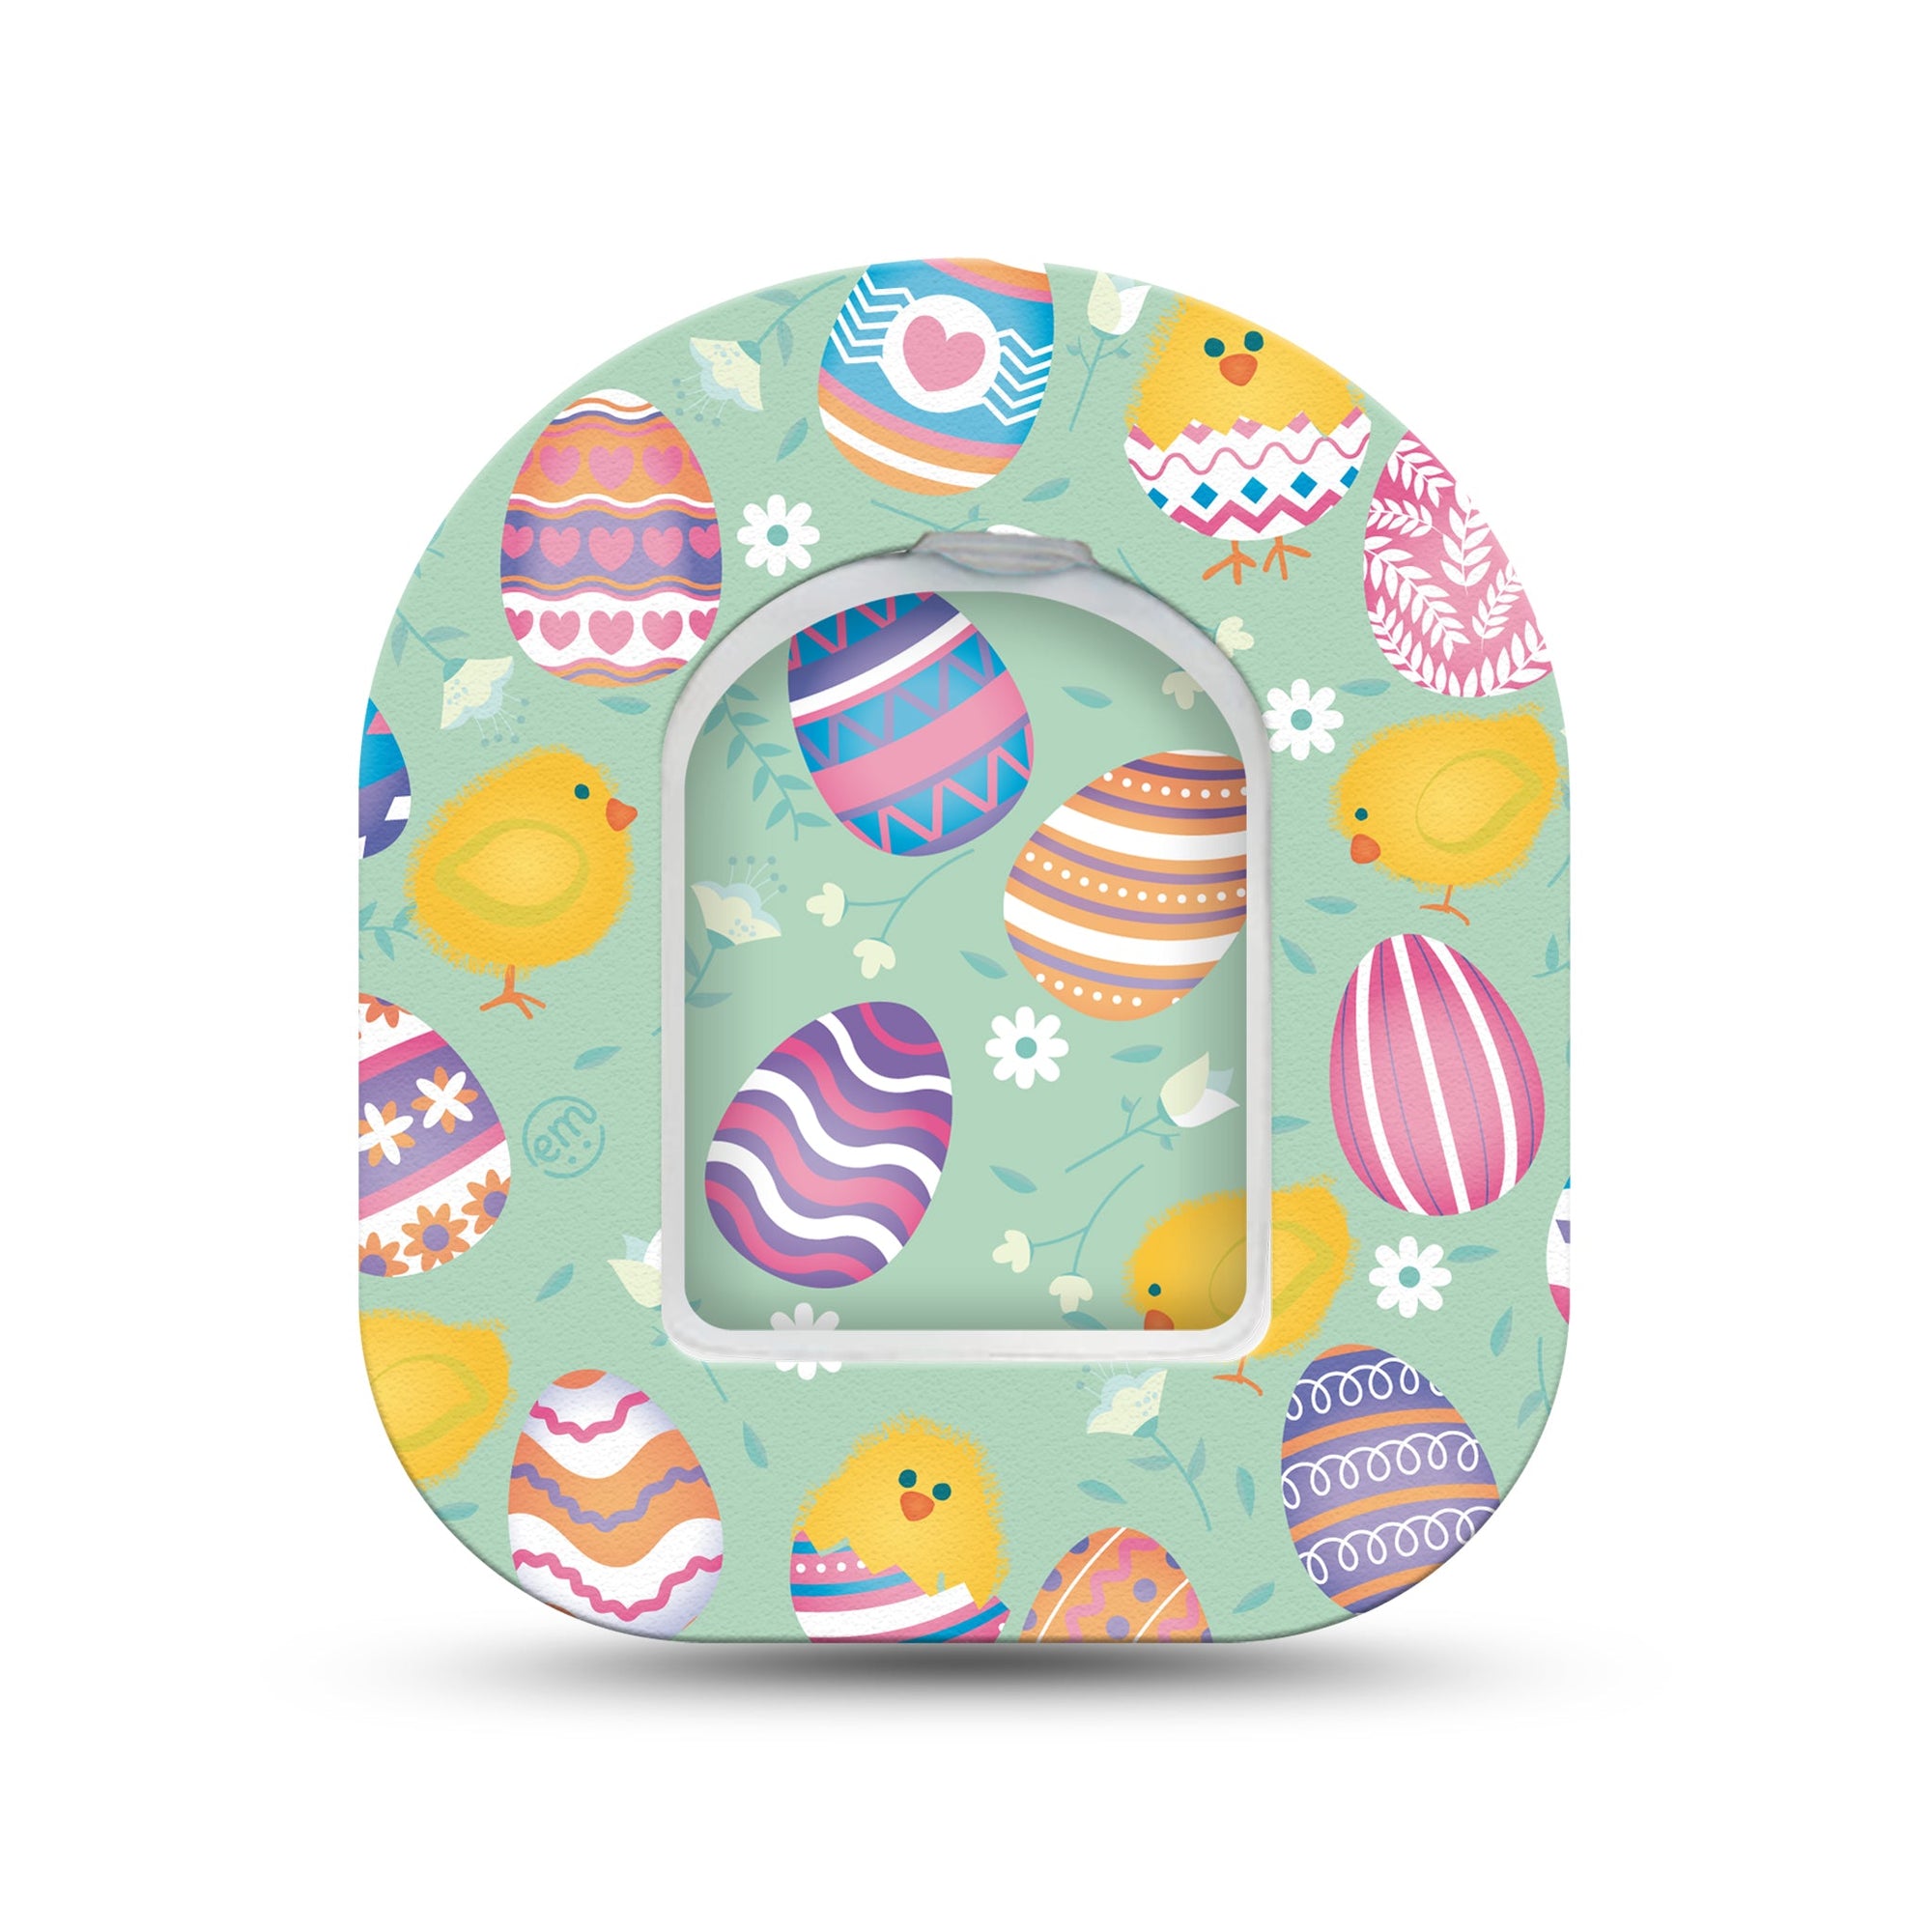 ExpressionMed Spring Chicks Pod Mini Tape Single Sticker and Single Tape, Fresh Feathers Plaster Pump Design